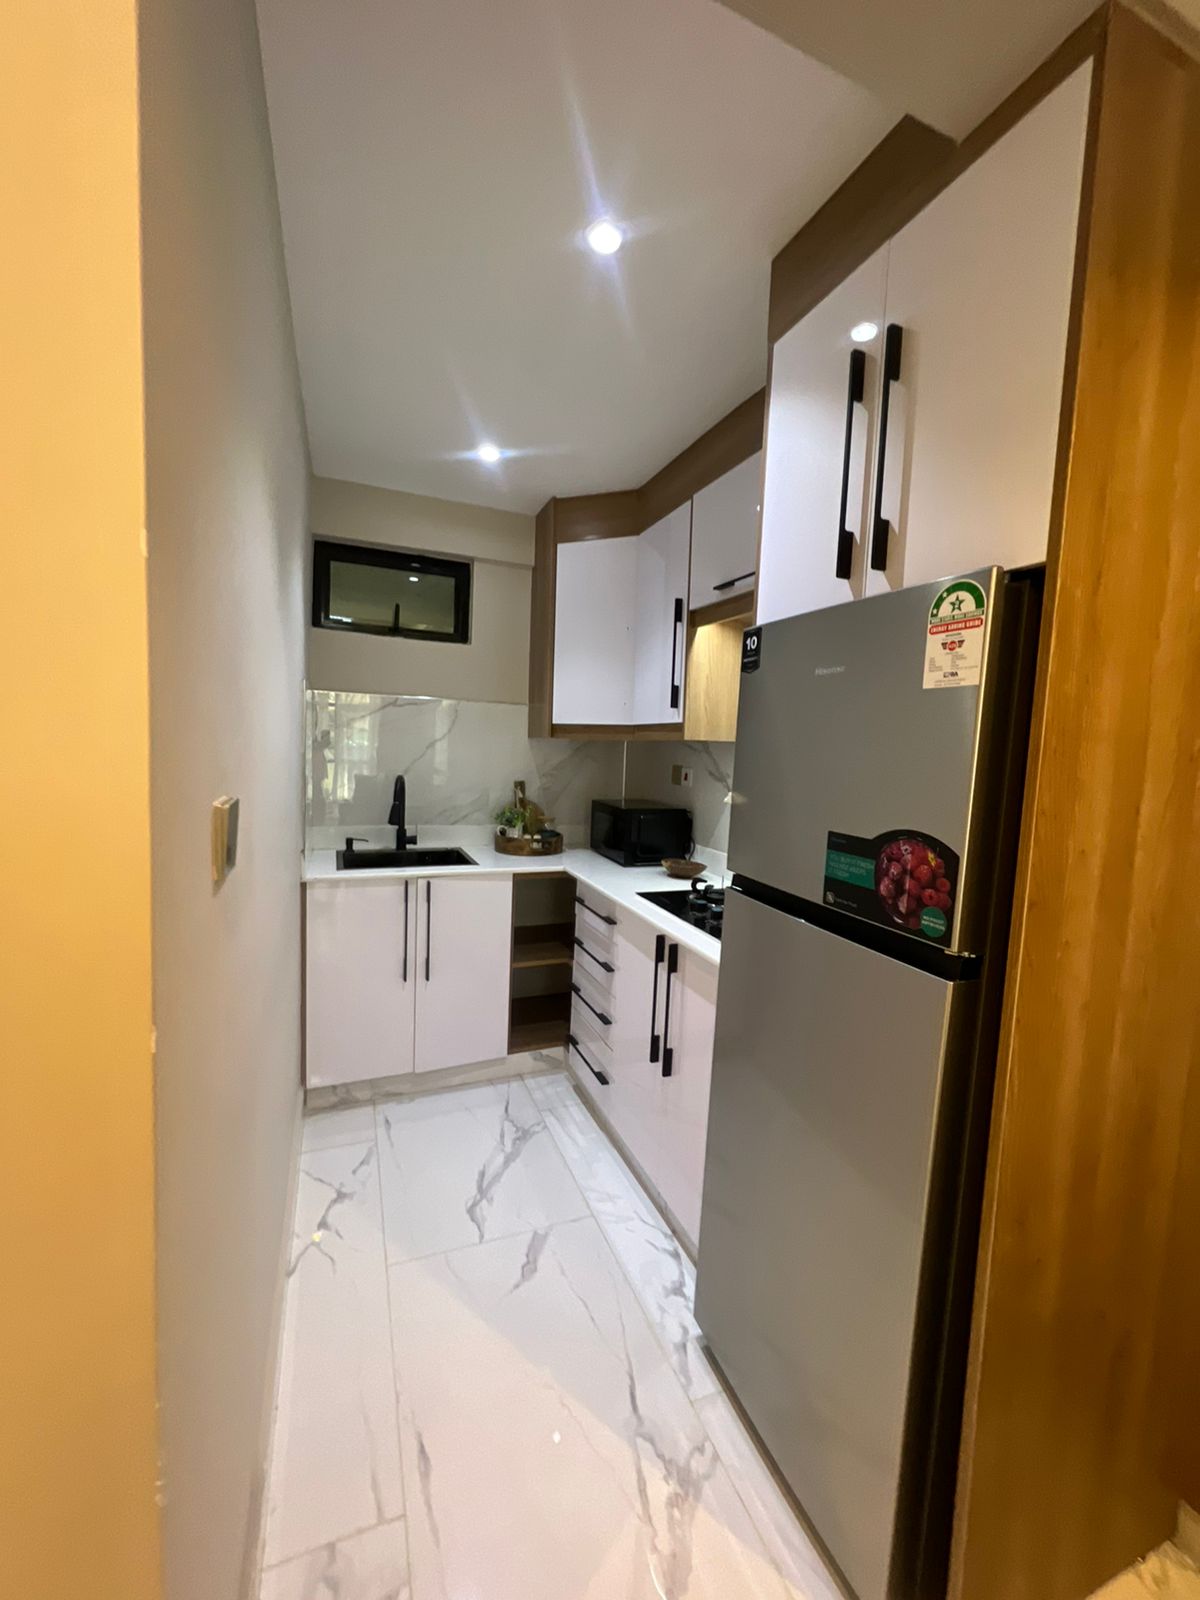 Studio Apartments For Sale 1 Bedroom Apartments For Sale 2 Bedroom Apartments For Sale in Kilimani, Nairobi. (35 sqm) – Kes. 4.5M expected income Ksh 45,000 a month unfurnished. Musilli Homes